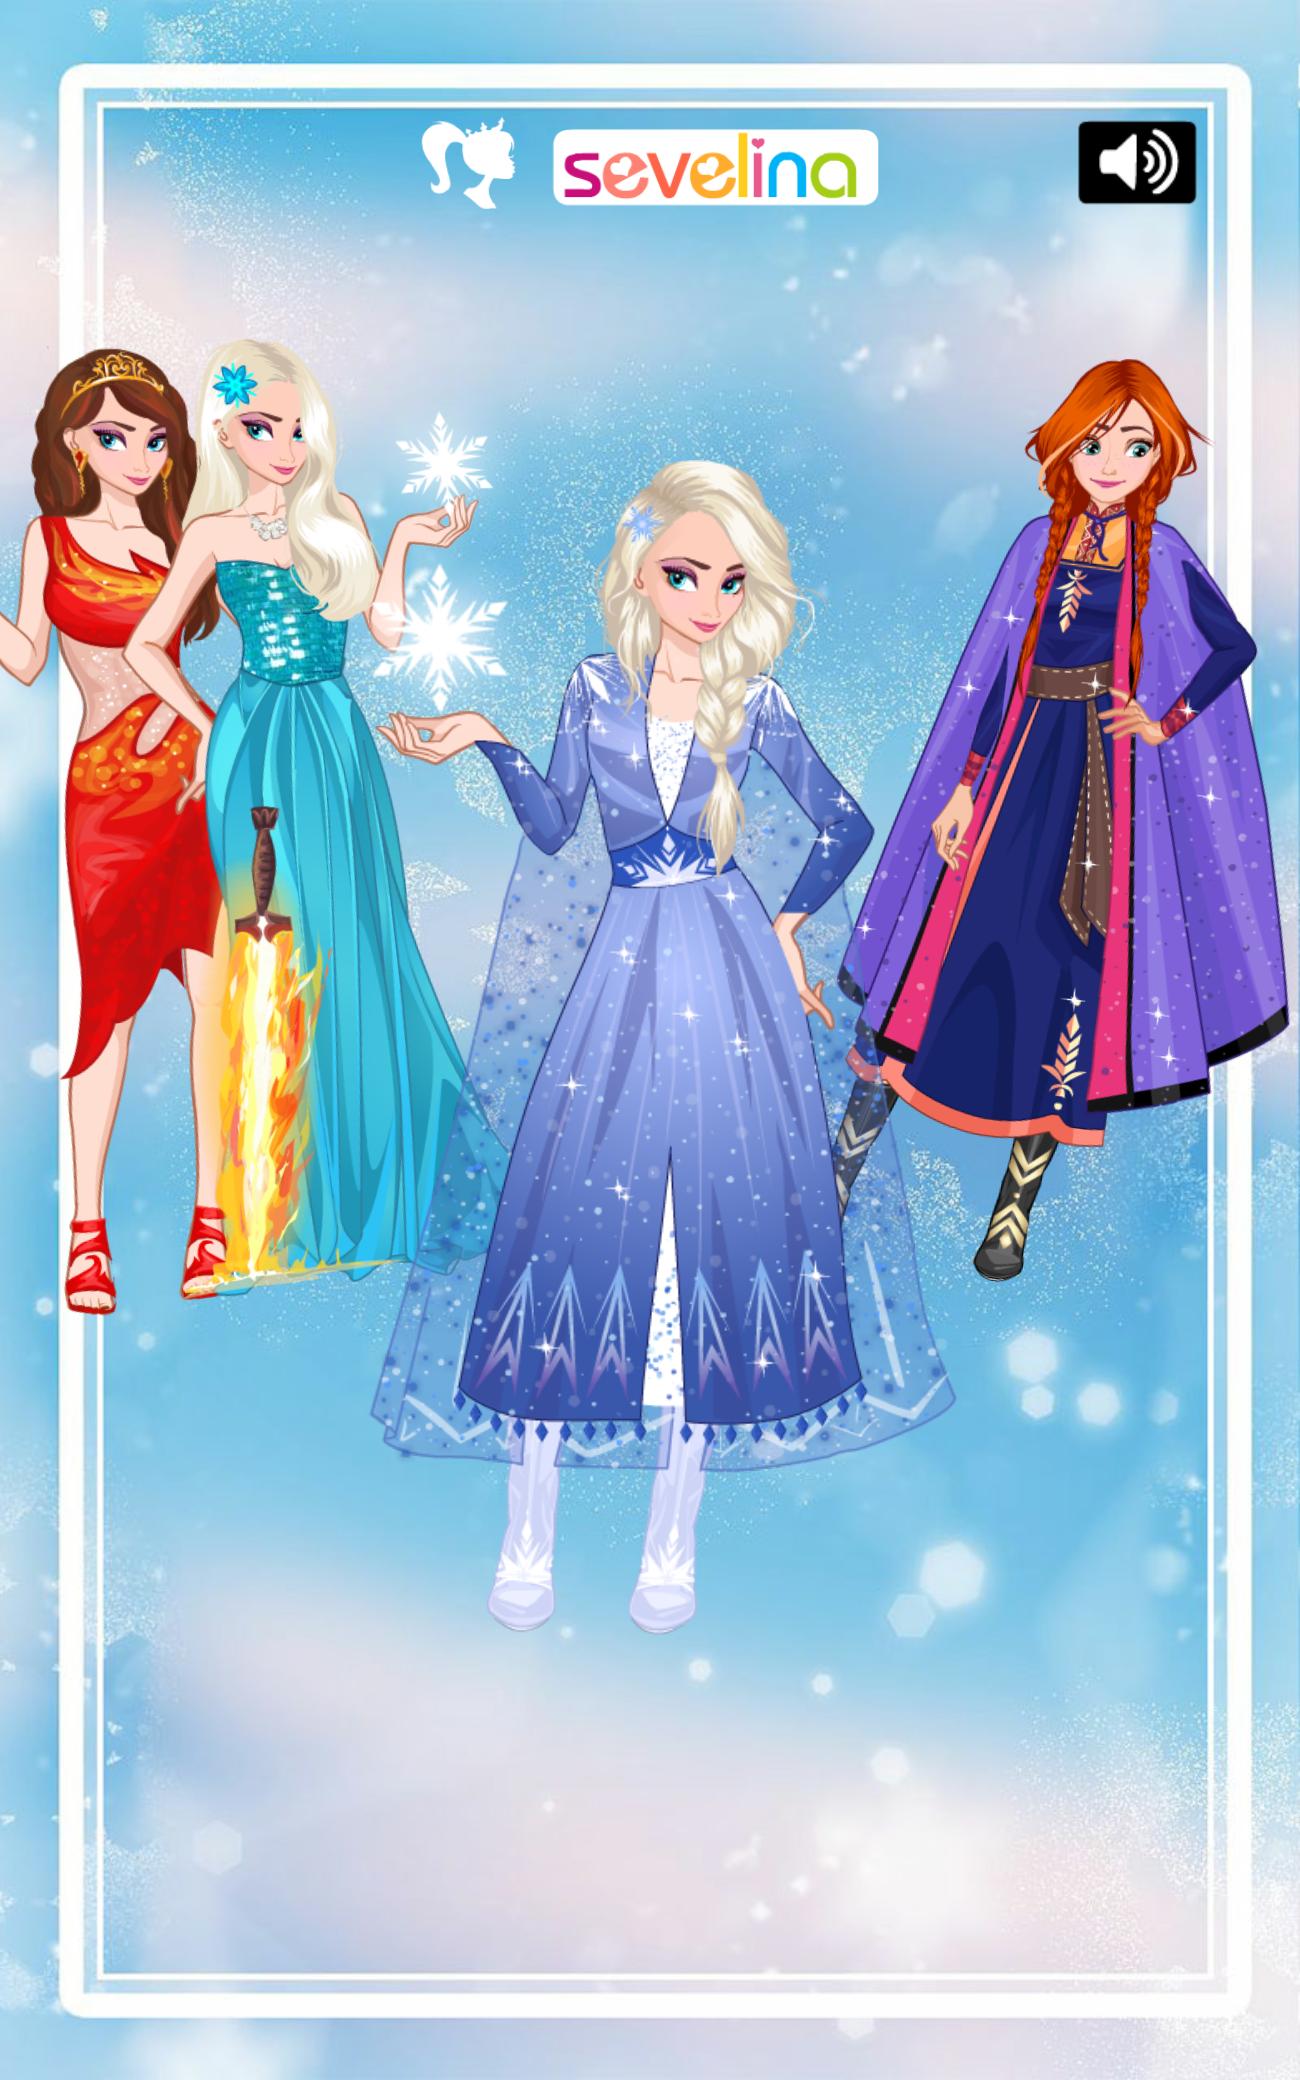 ❄️ Icy or Fire 🔥 dress up game ❄️ Frozen land 2.4 Screenshot 1